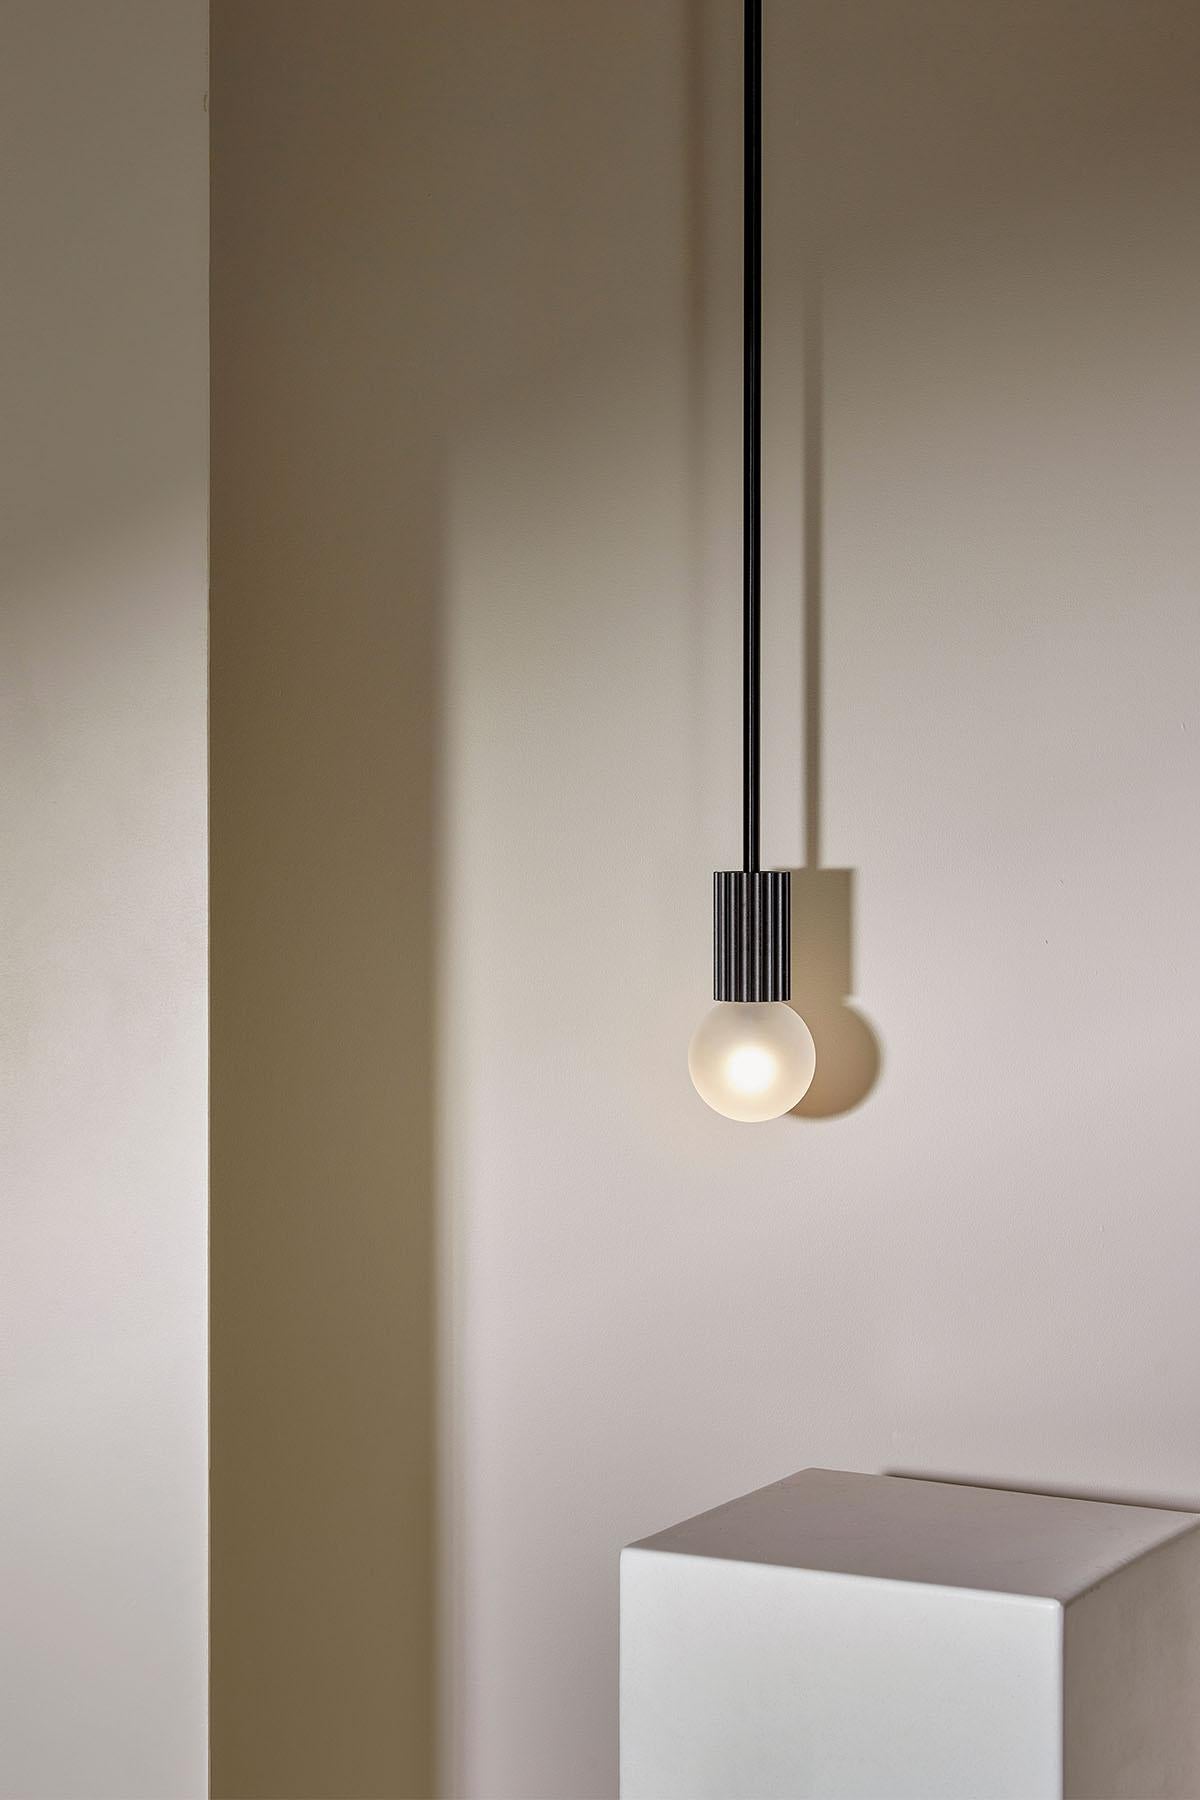 The Attalos Pendant Light, 95 is a classical and sculptural LED light. Part of the Attalos range, each piece is inspired by the fluted columns from the Stoa of Attalos, Athens and the Doric order. The Attalos Pendant Light features a delicate